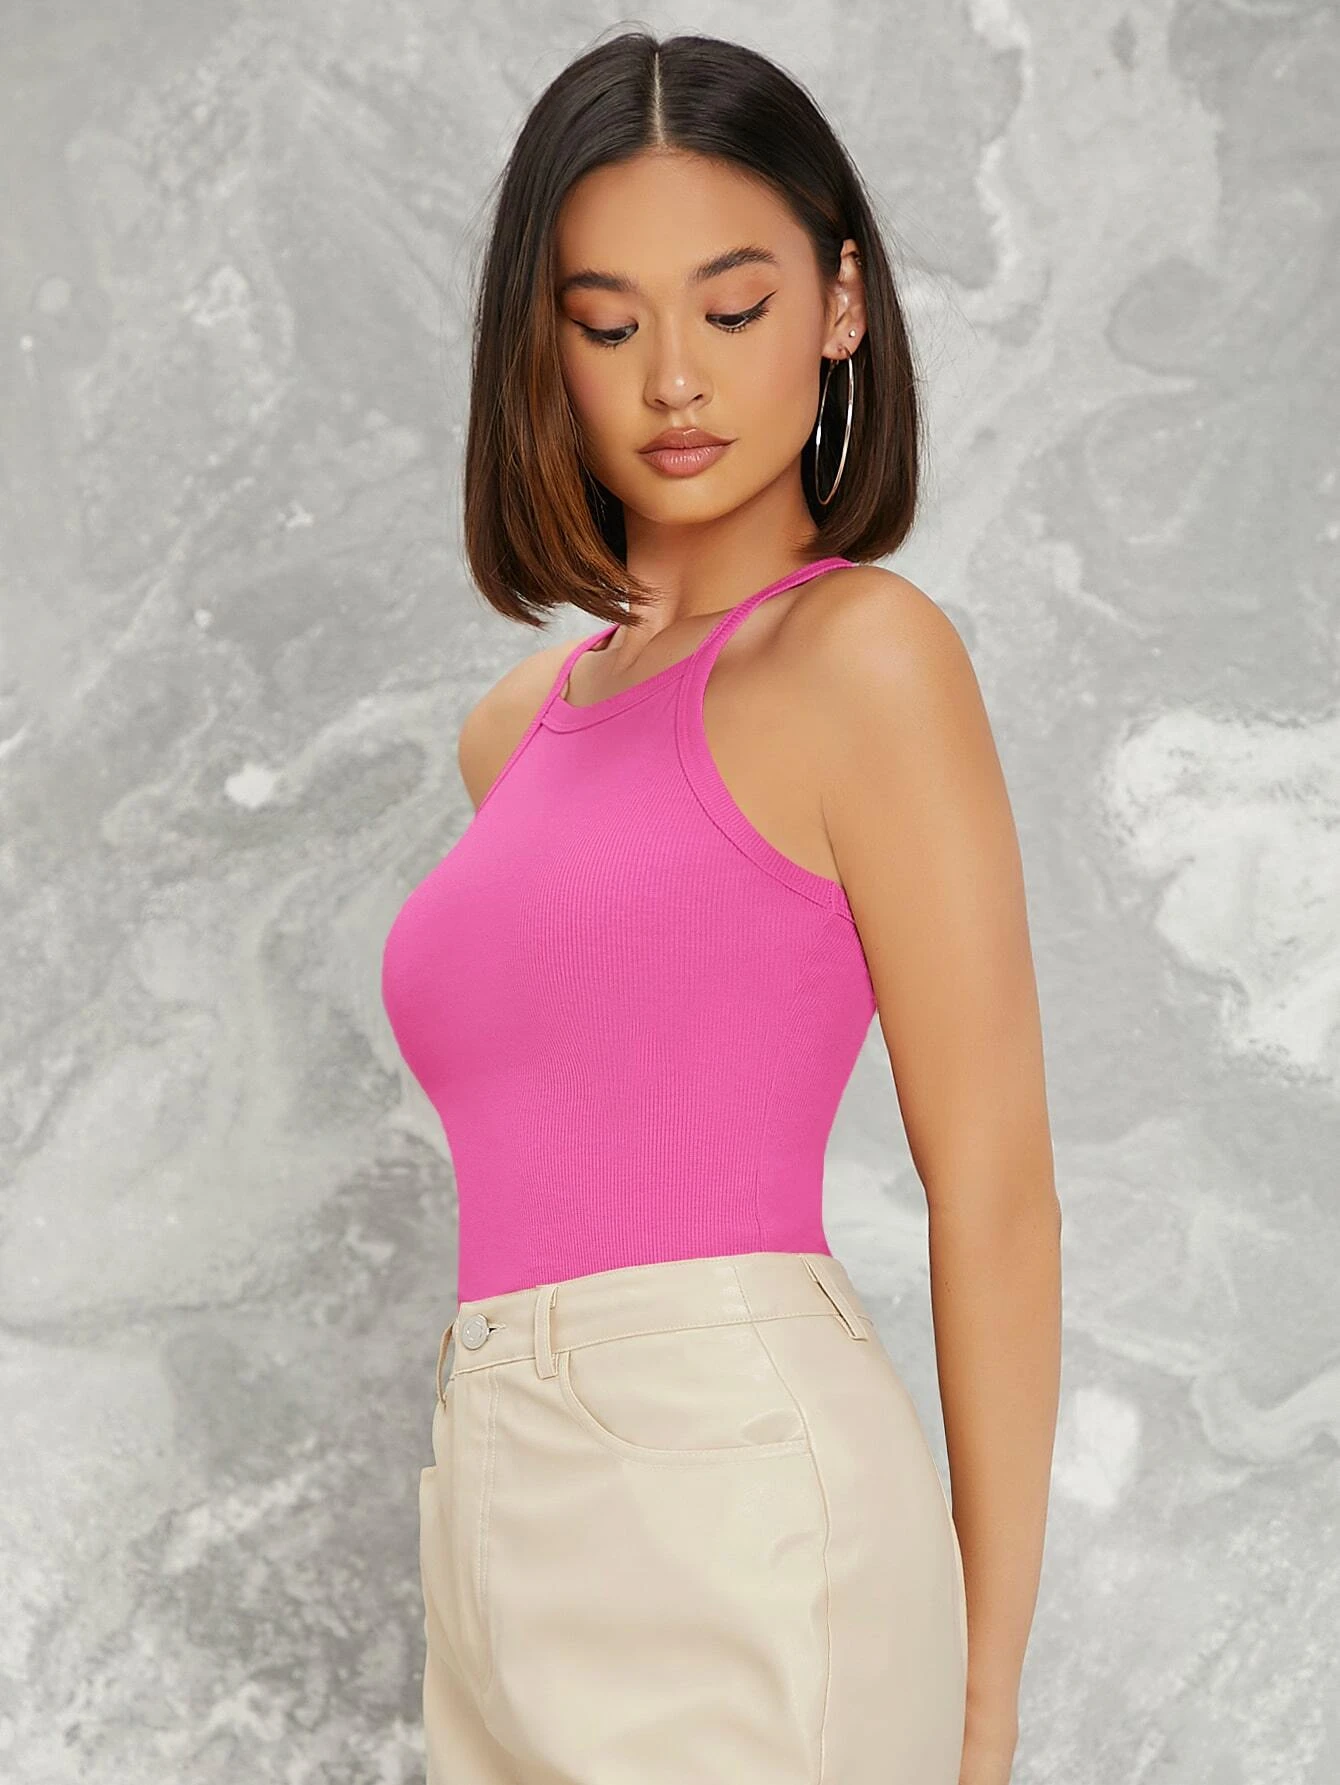 Solid Form Fitting Halter Top